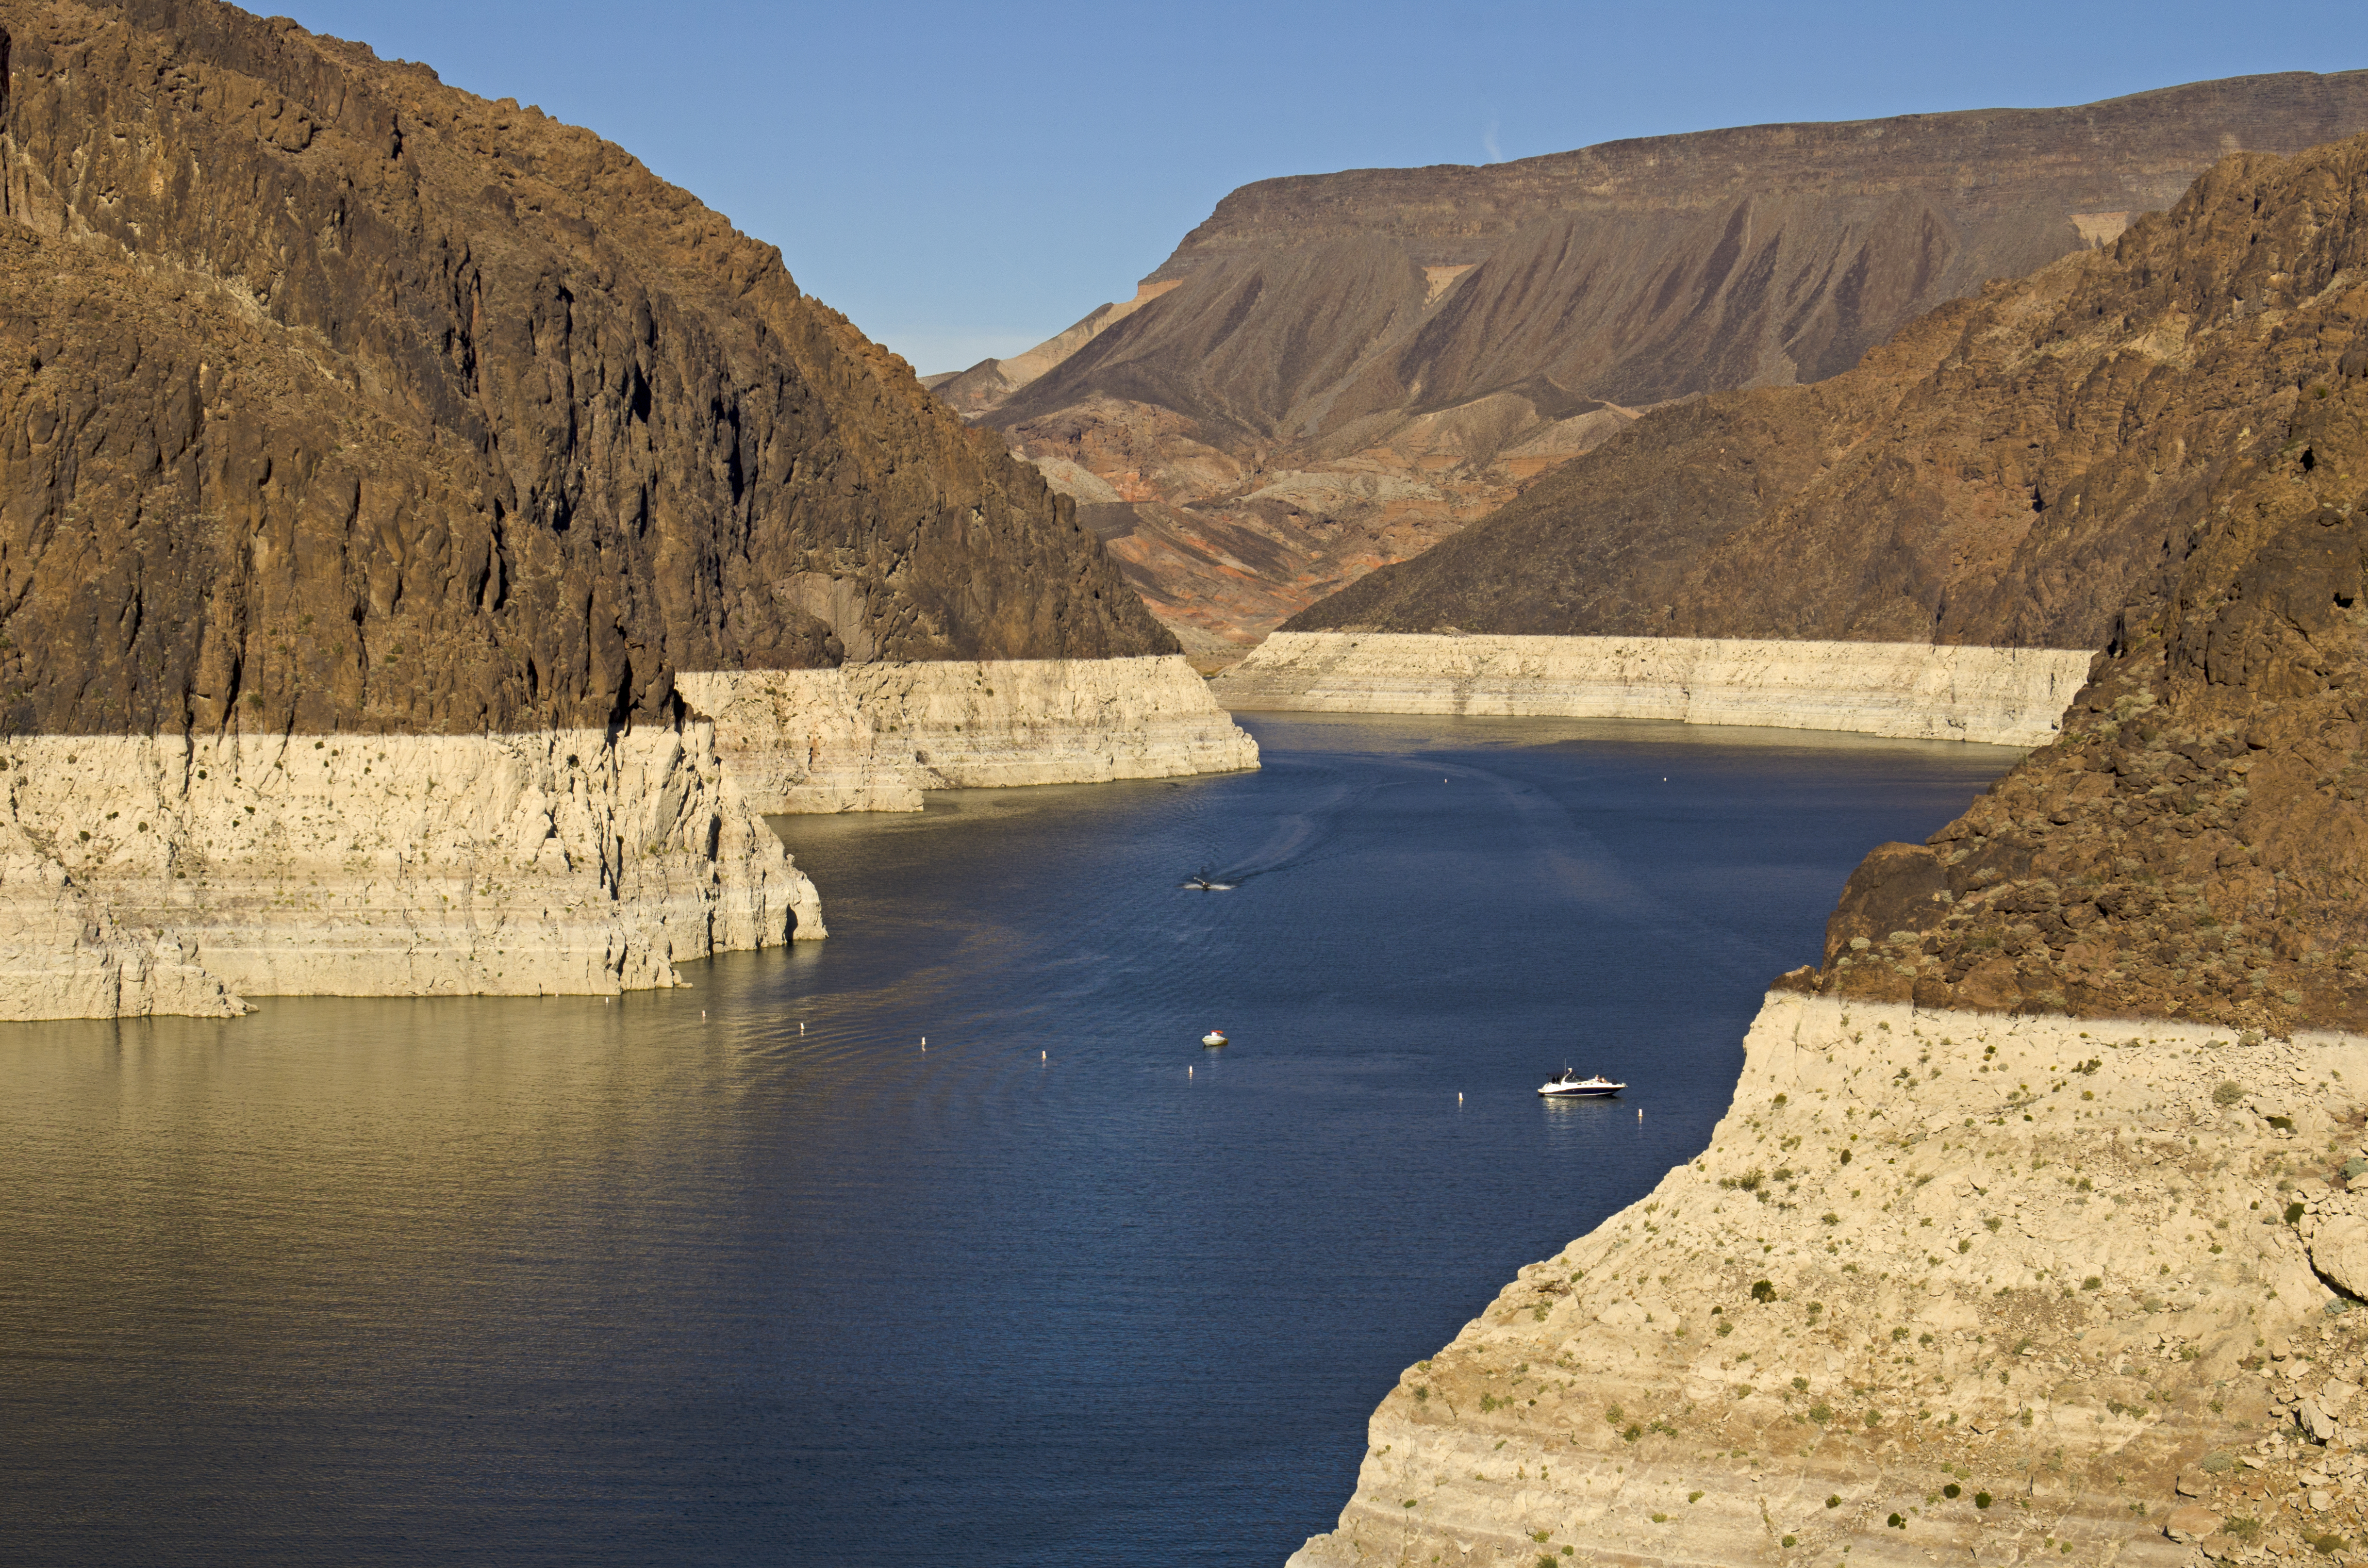 Boats on Lake Mead showing the change in color on shore due to low water